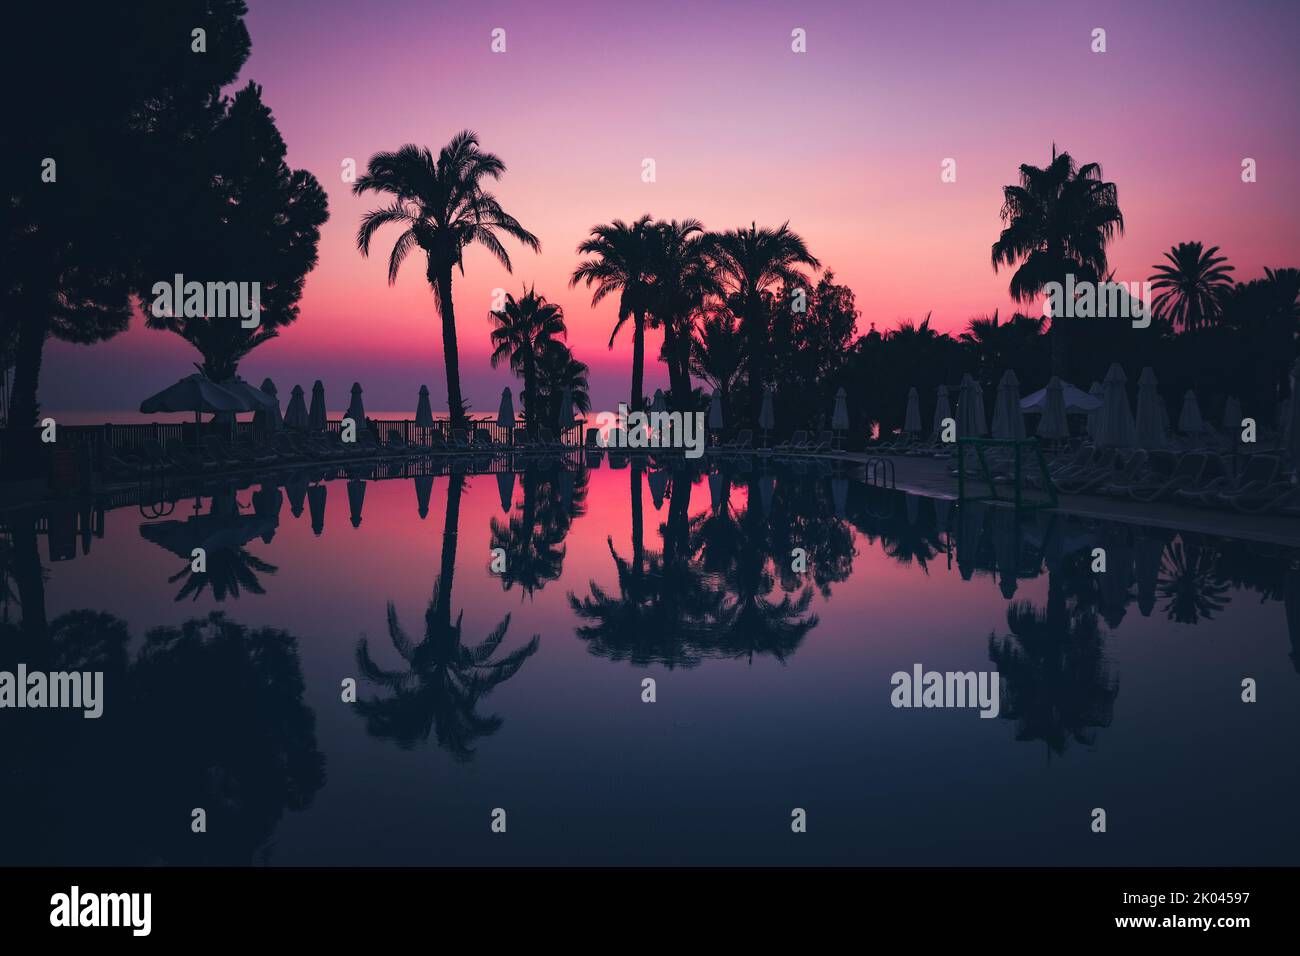 Silhouette of palm trees at the resort pool on pink and purple sunset sky, landscape image. Stock Photo